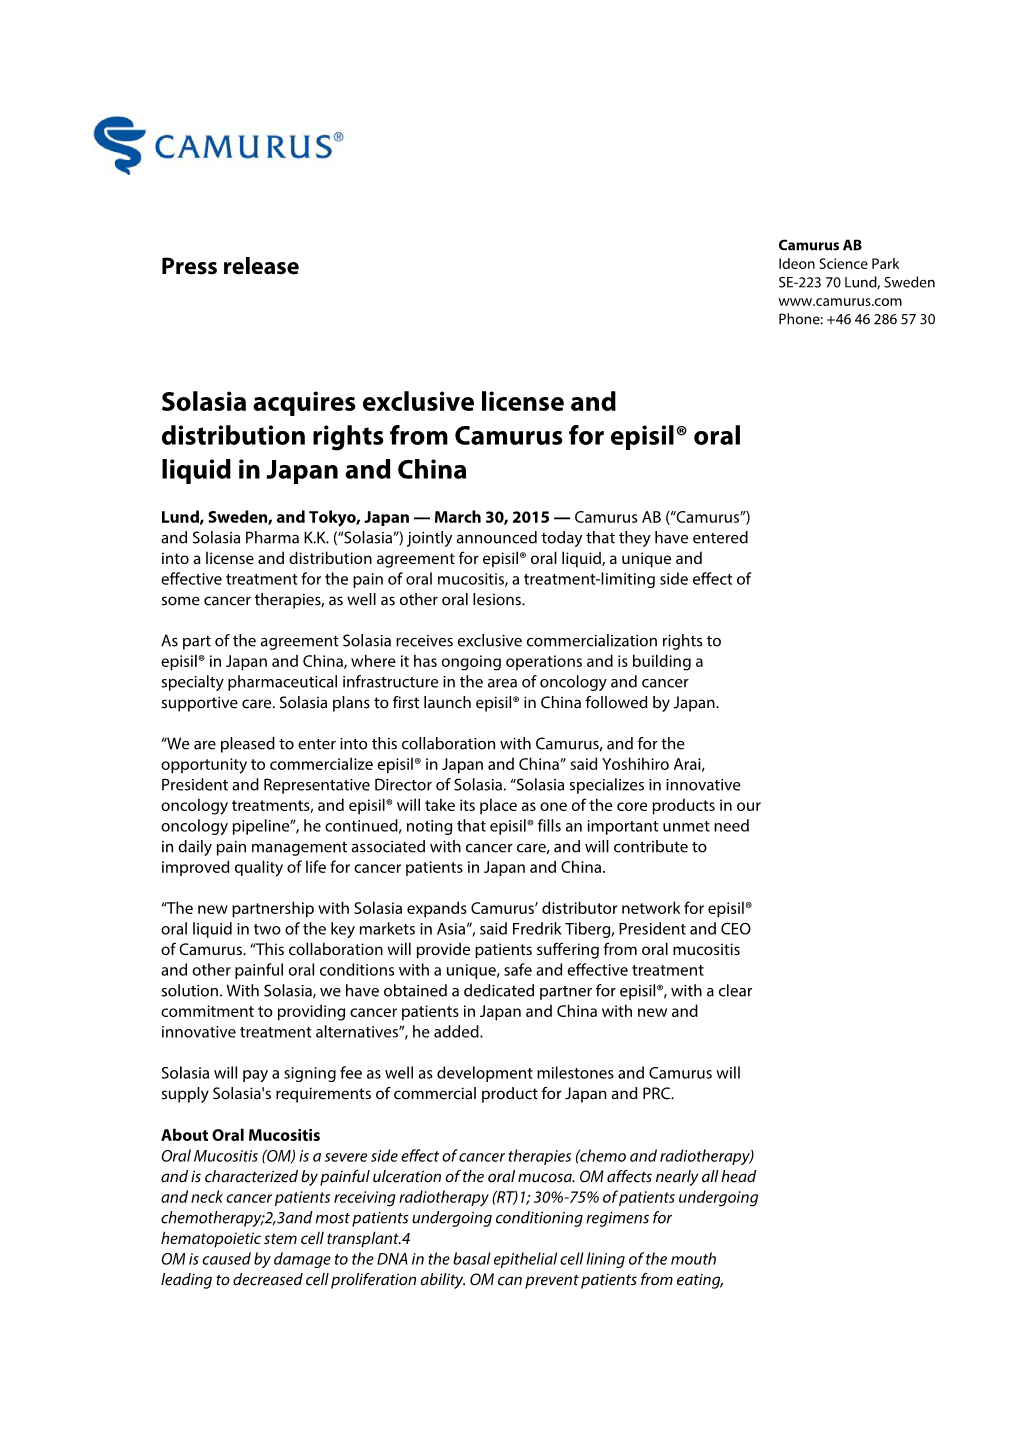 Solasia Acquires Exclusive License and Distribution Rights from Camurus for Episil® Oral Liquid in Japan and China